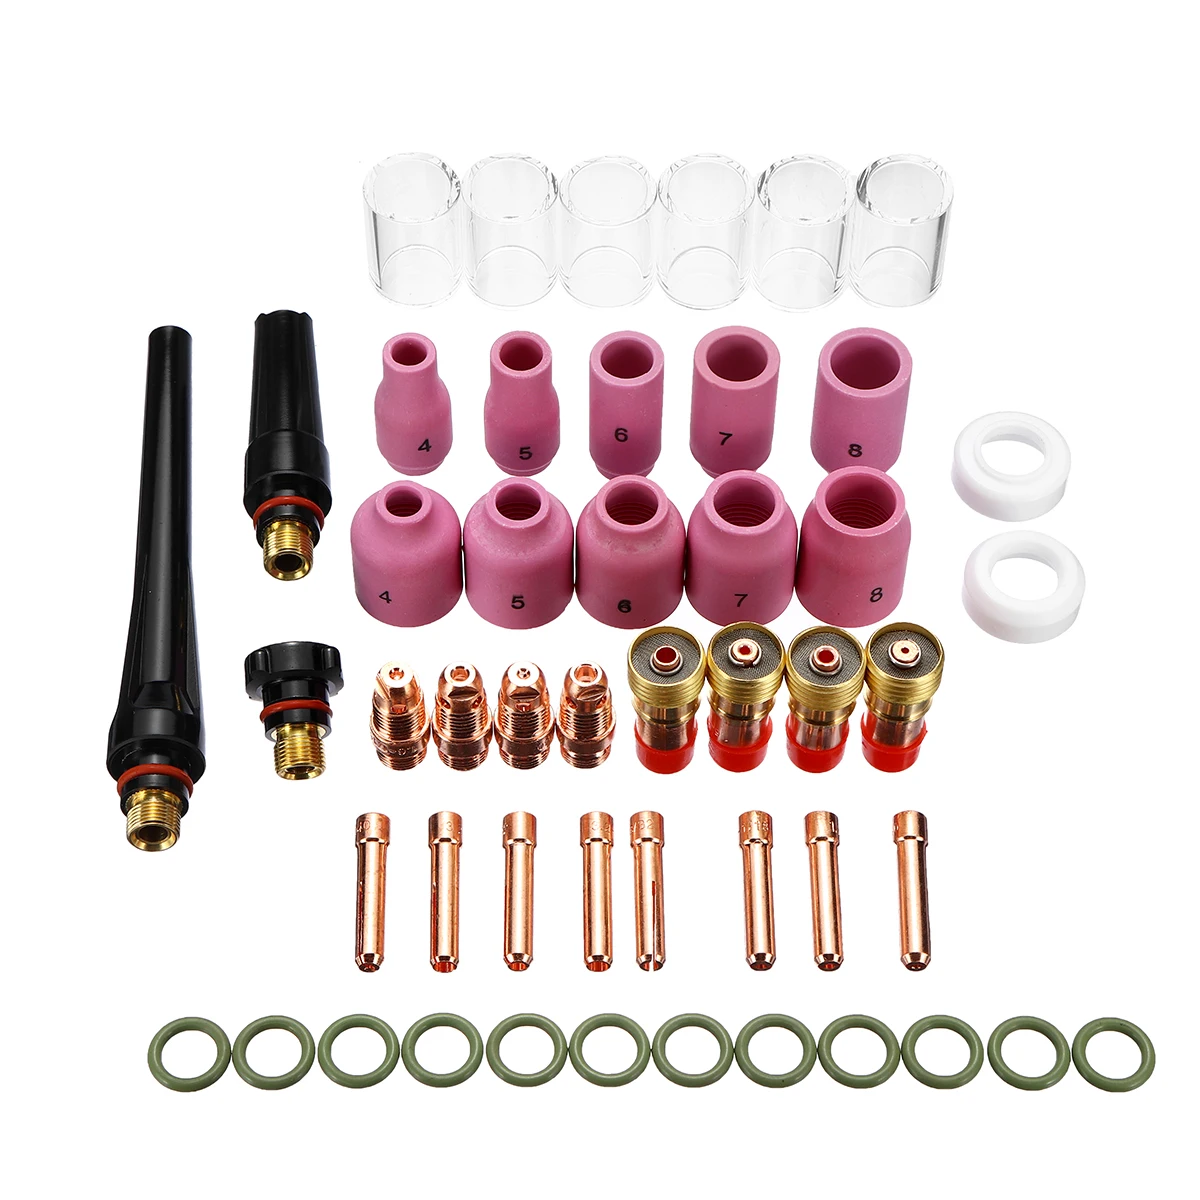 

49PCS For WP-17/18/26 TIG Welding Torch Stubby Gas Lens #10 Pyrex Glass Cup Kit Durable Practical Welding Accessories Set